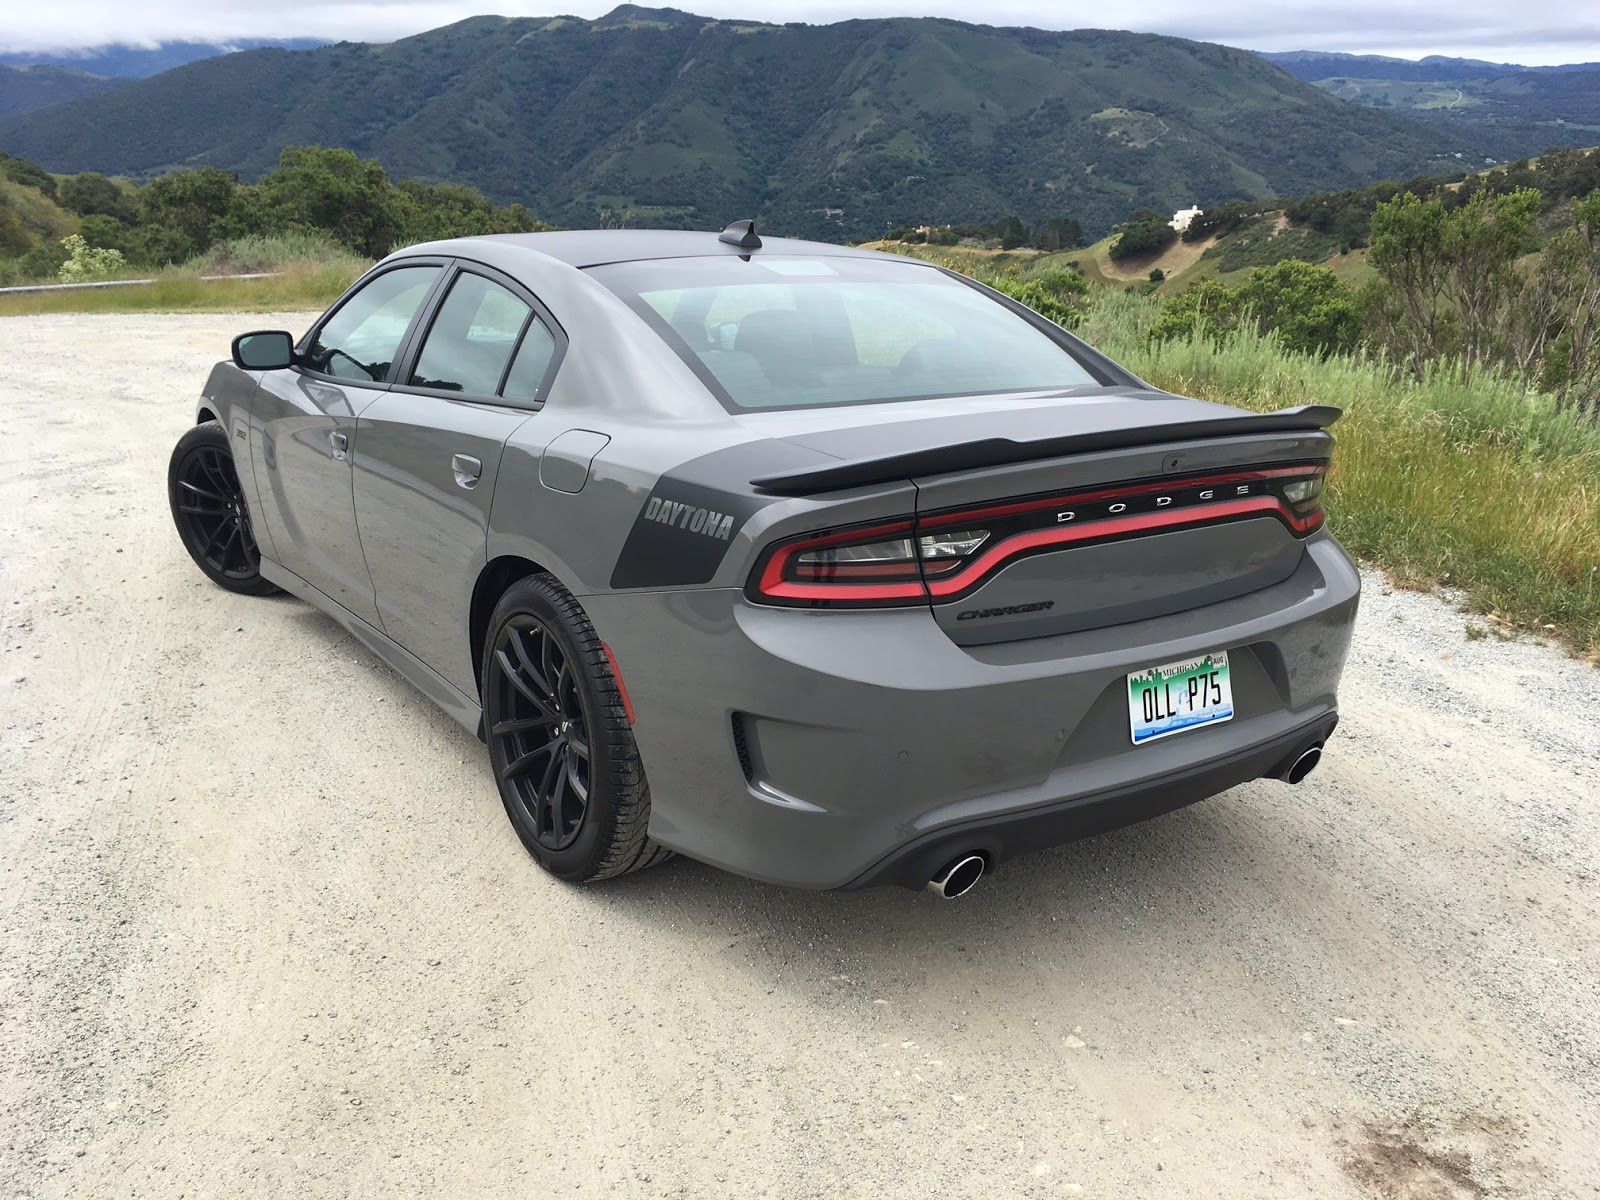 30 Minutes With: The 2017 Dodge Charger Daytona 392